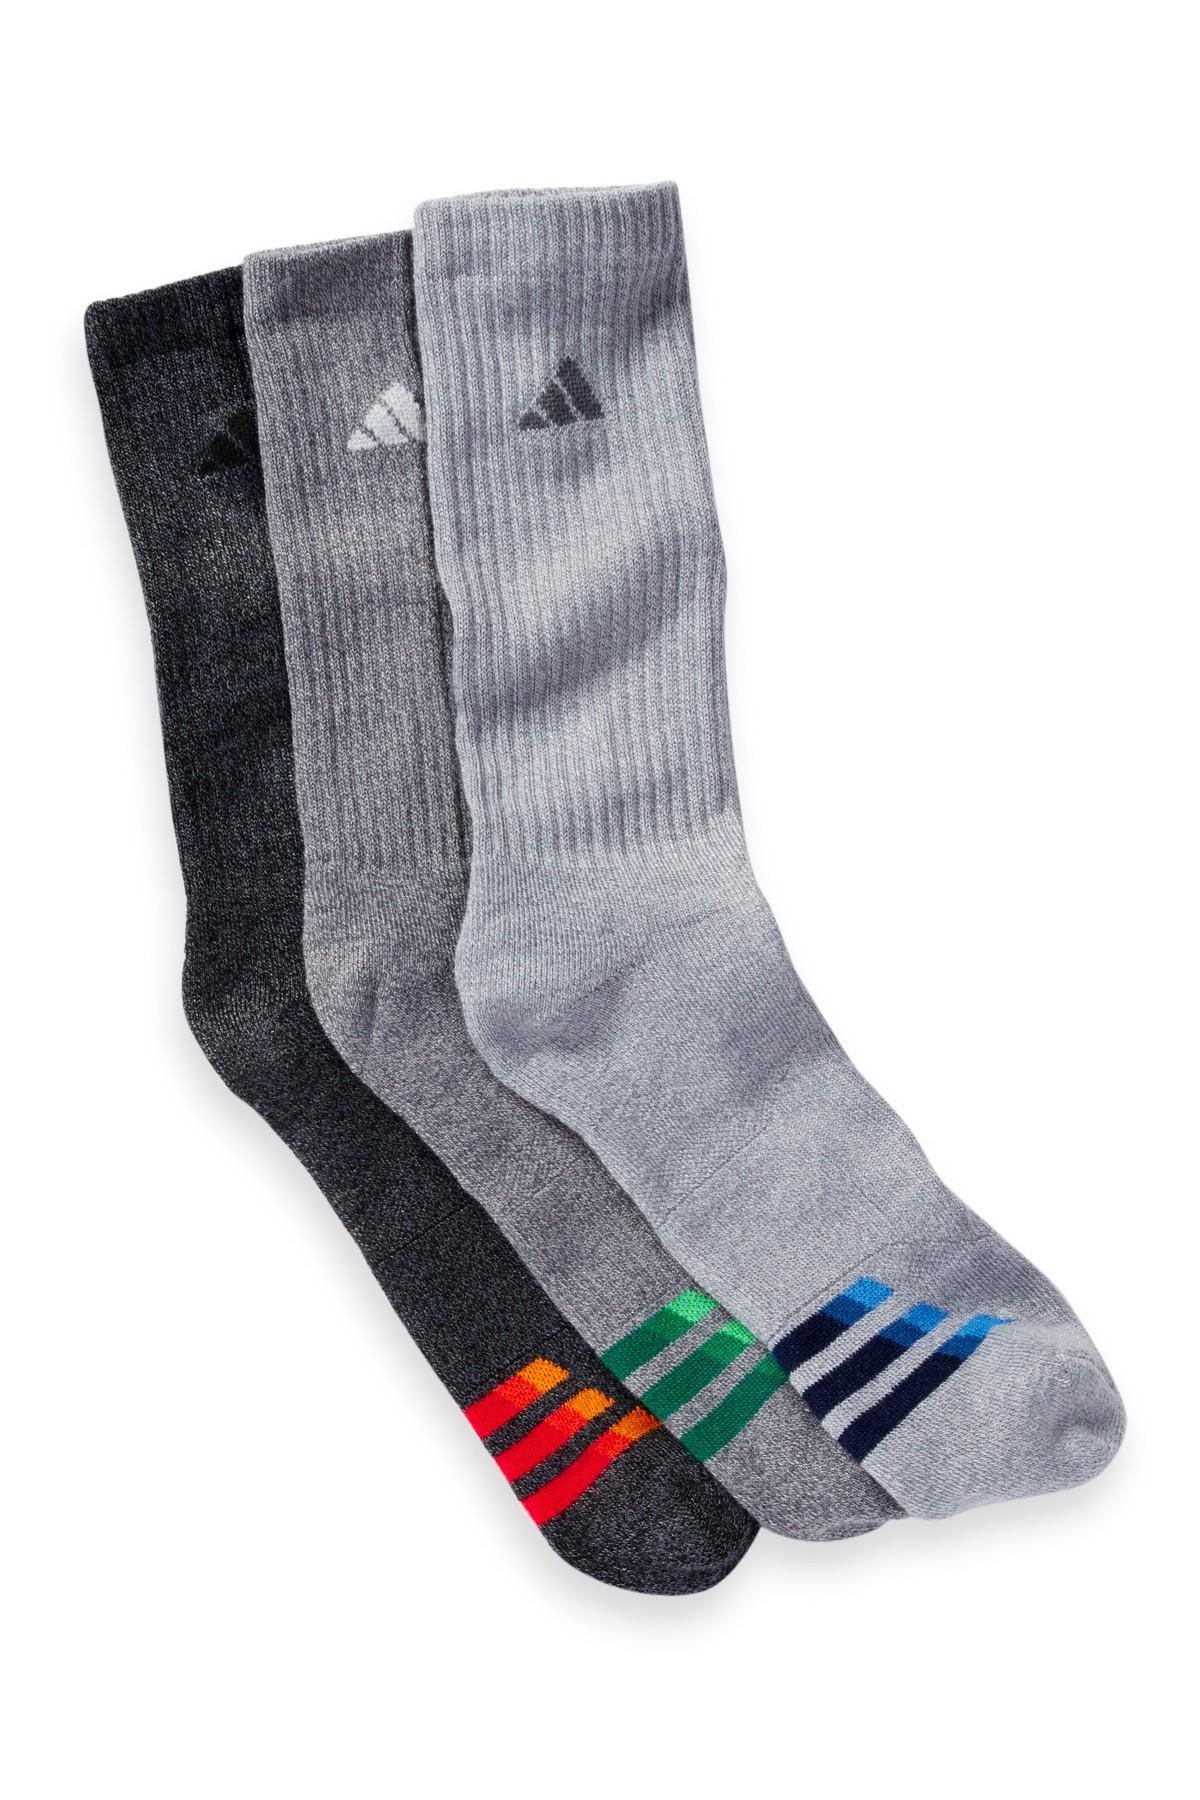 Adidas originals Climalite Compression Crew Socks - Pack Of 3 in Gray ...